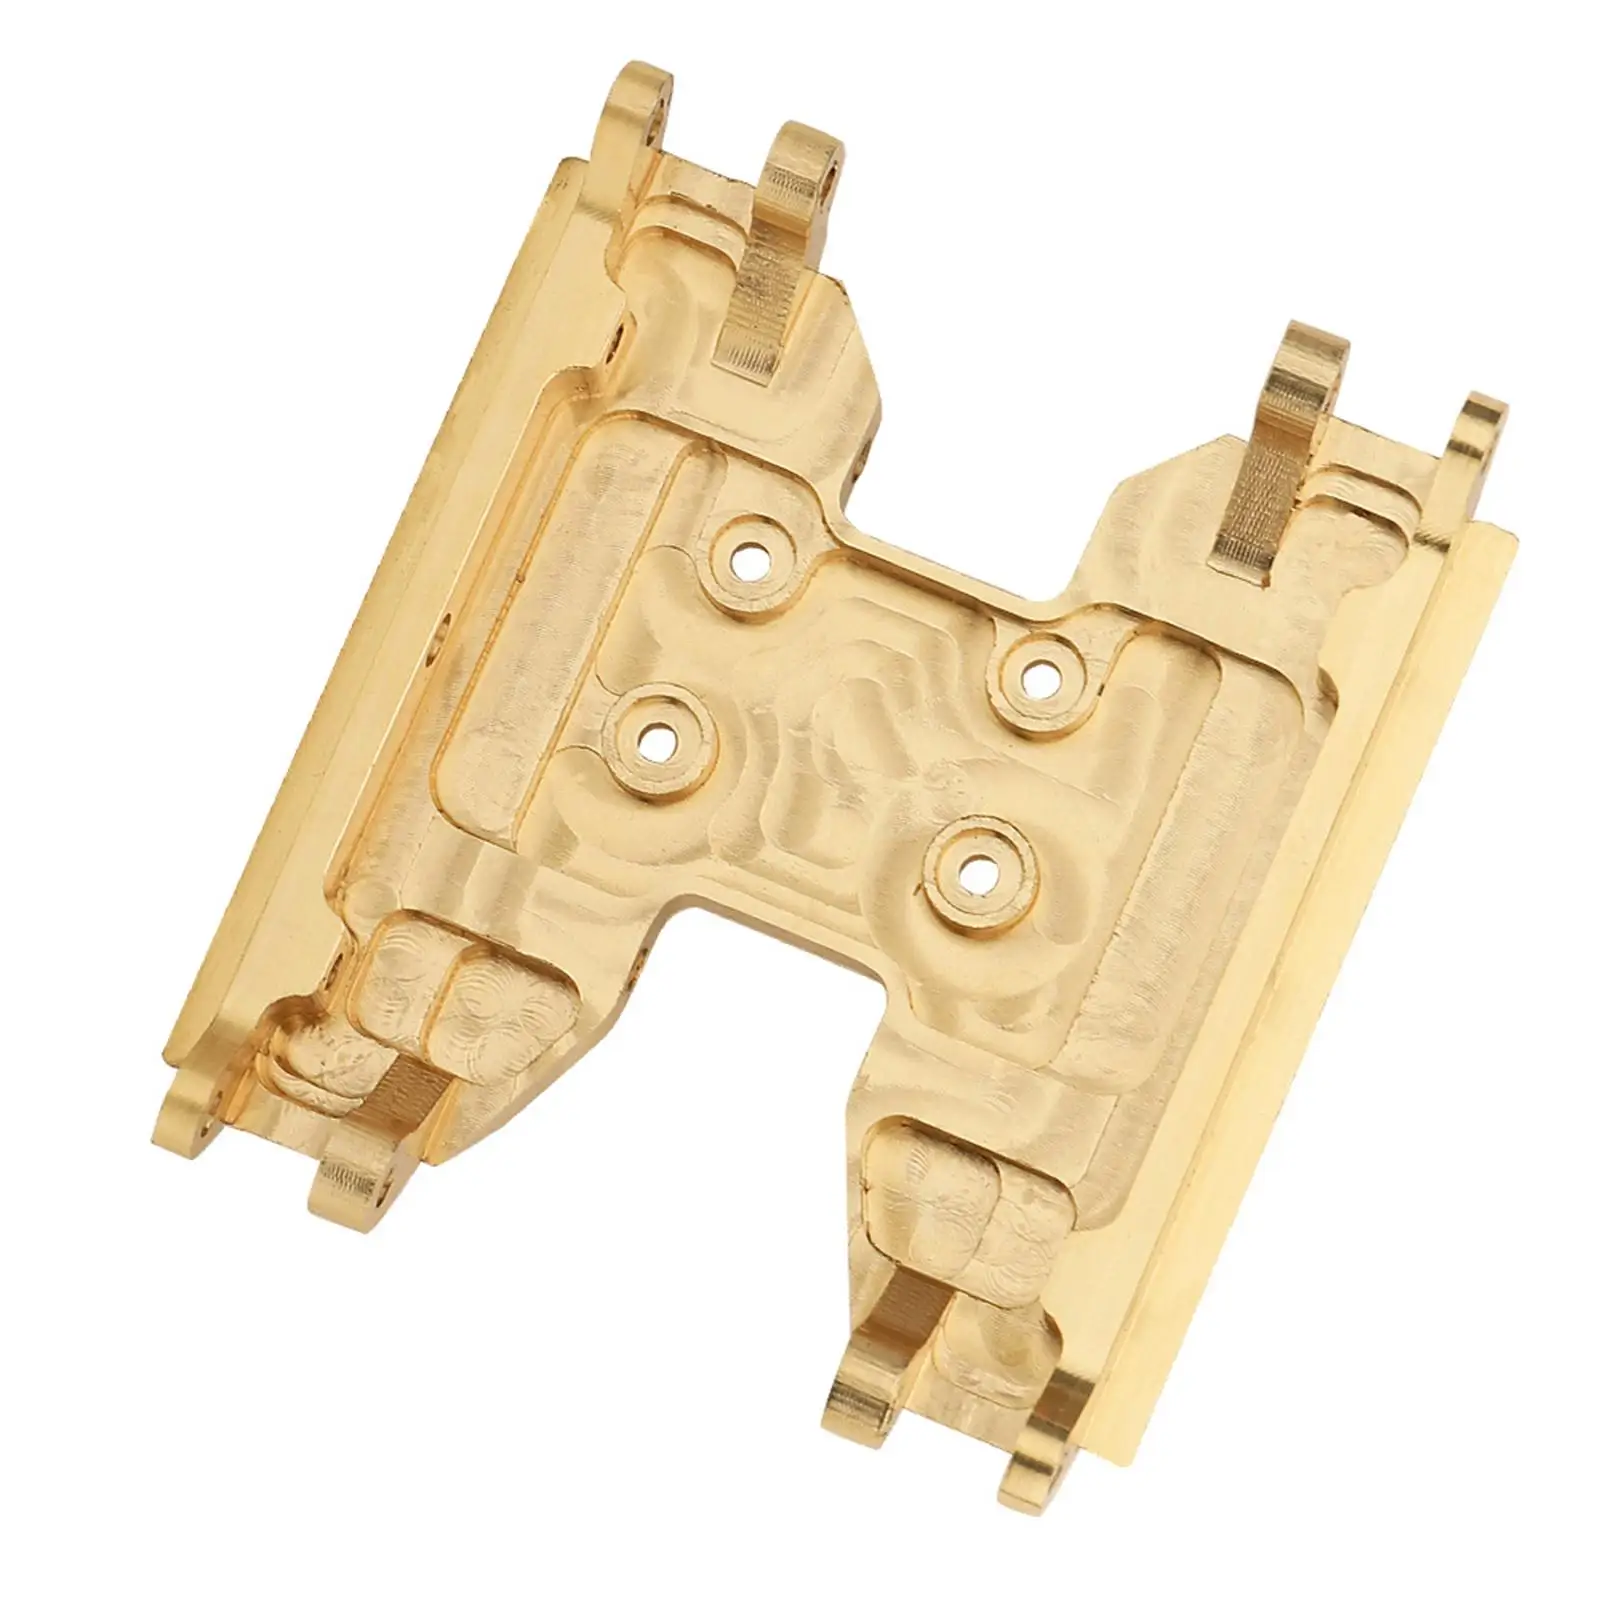 Brass Skid Plate Upgrade Parts Accessories Frame Protector Chassis Guard Board Gearbox Mount Holder for 1/18 RC Crawler Car